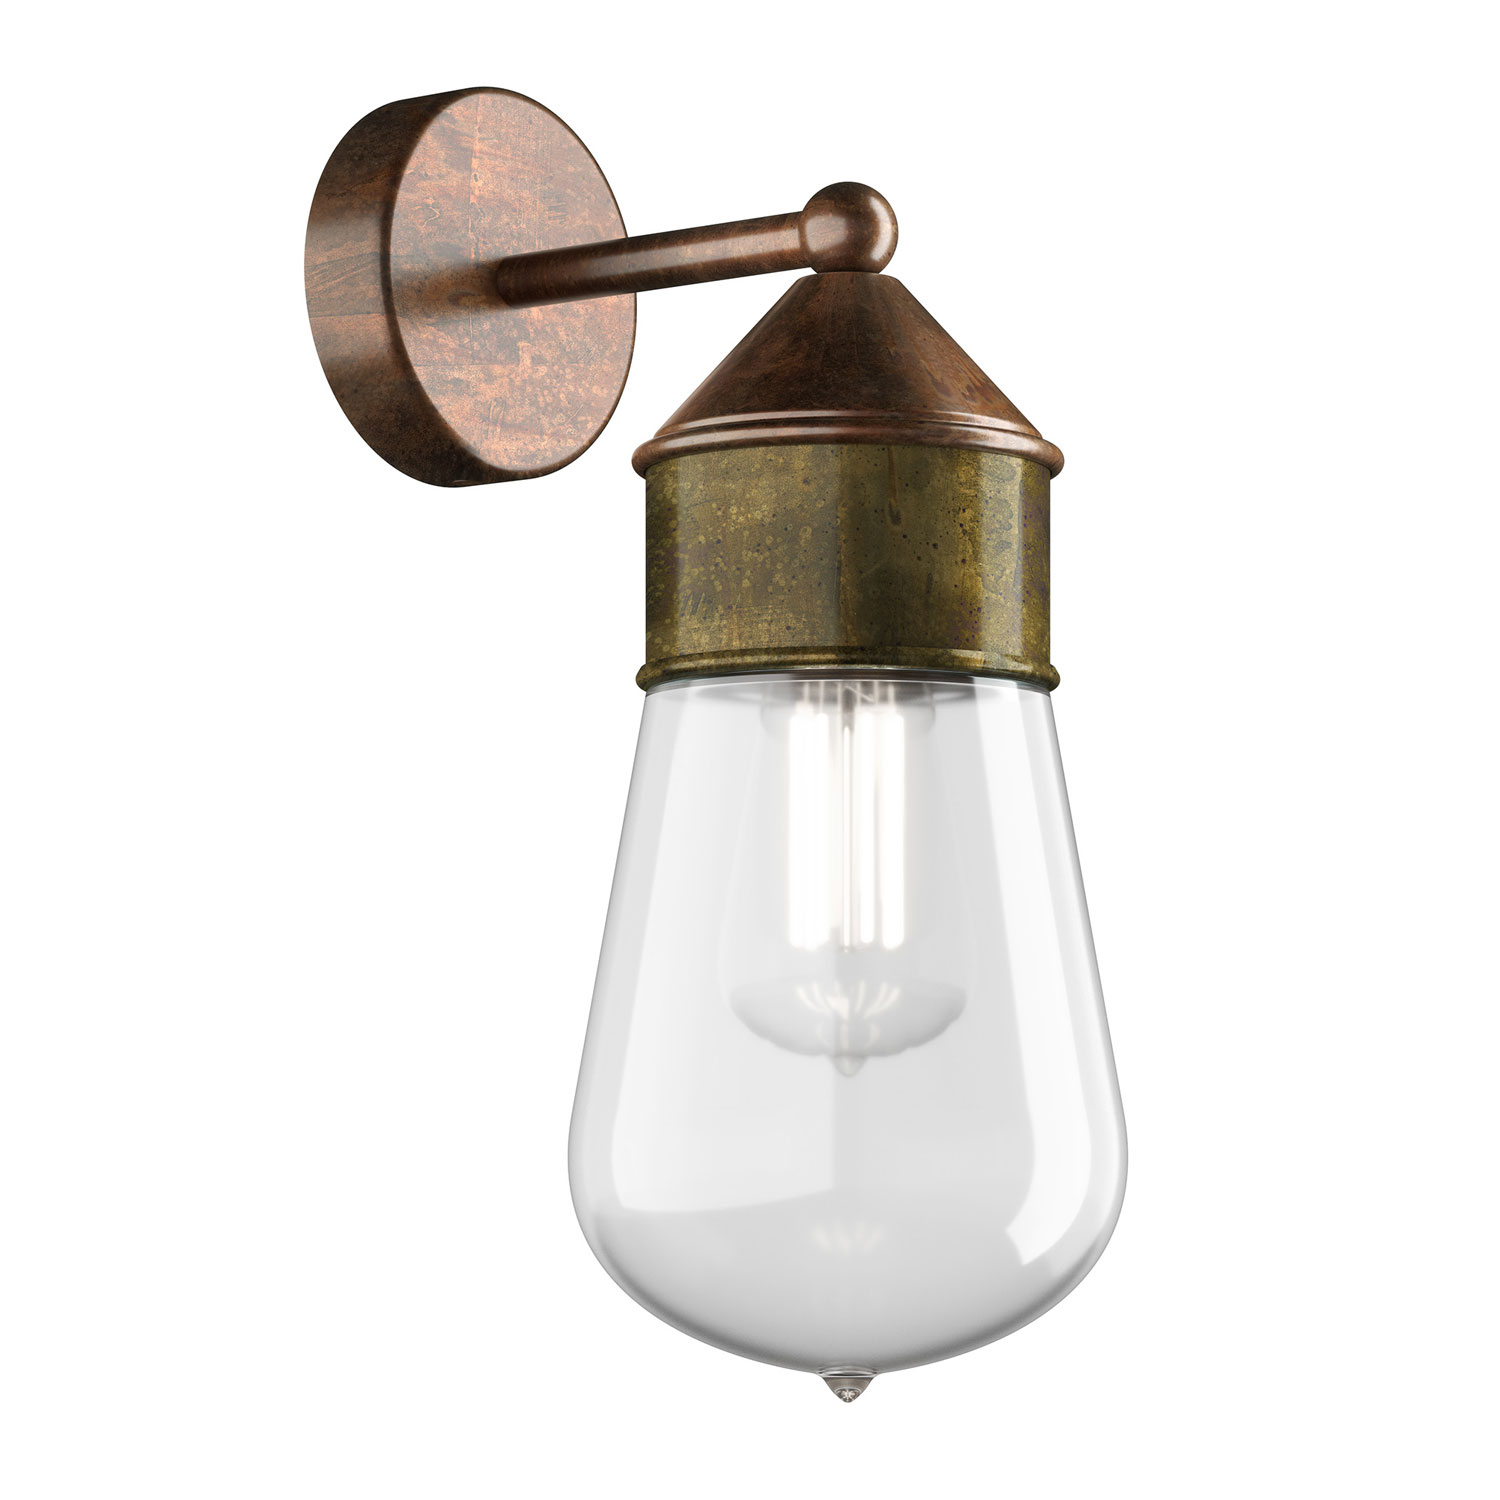 Indoor/Outdoor wall light Drop 270.04.ORT by Il Fanale